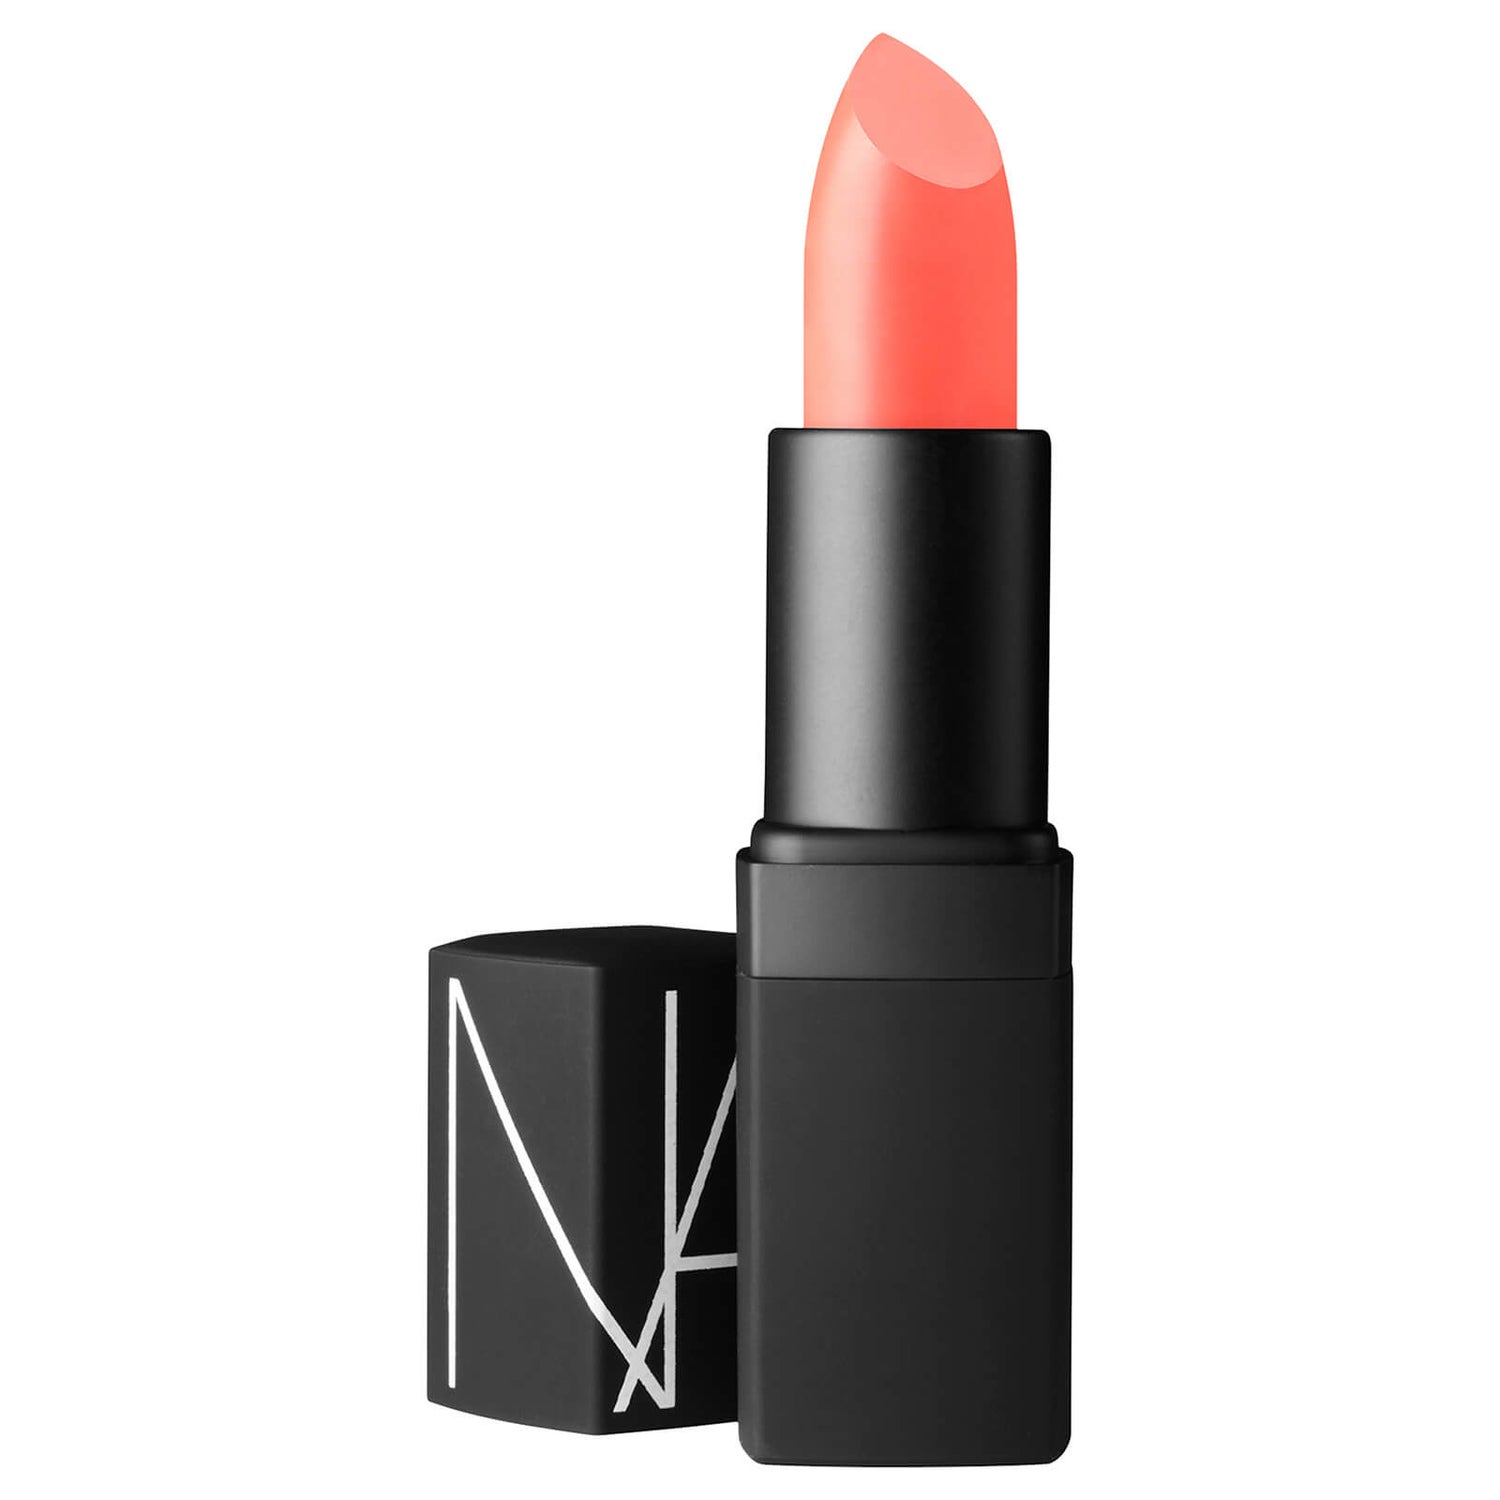 NARS Cosmetics Lipstick - Breaking Free 3.4g (Limited Edition)